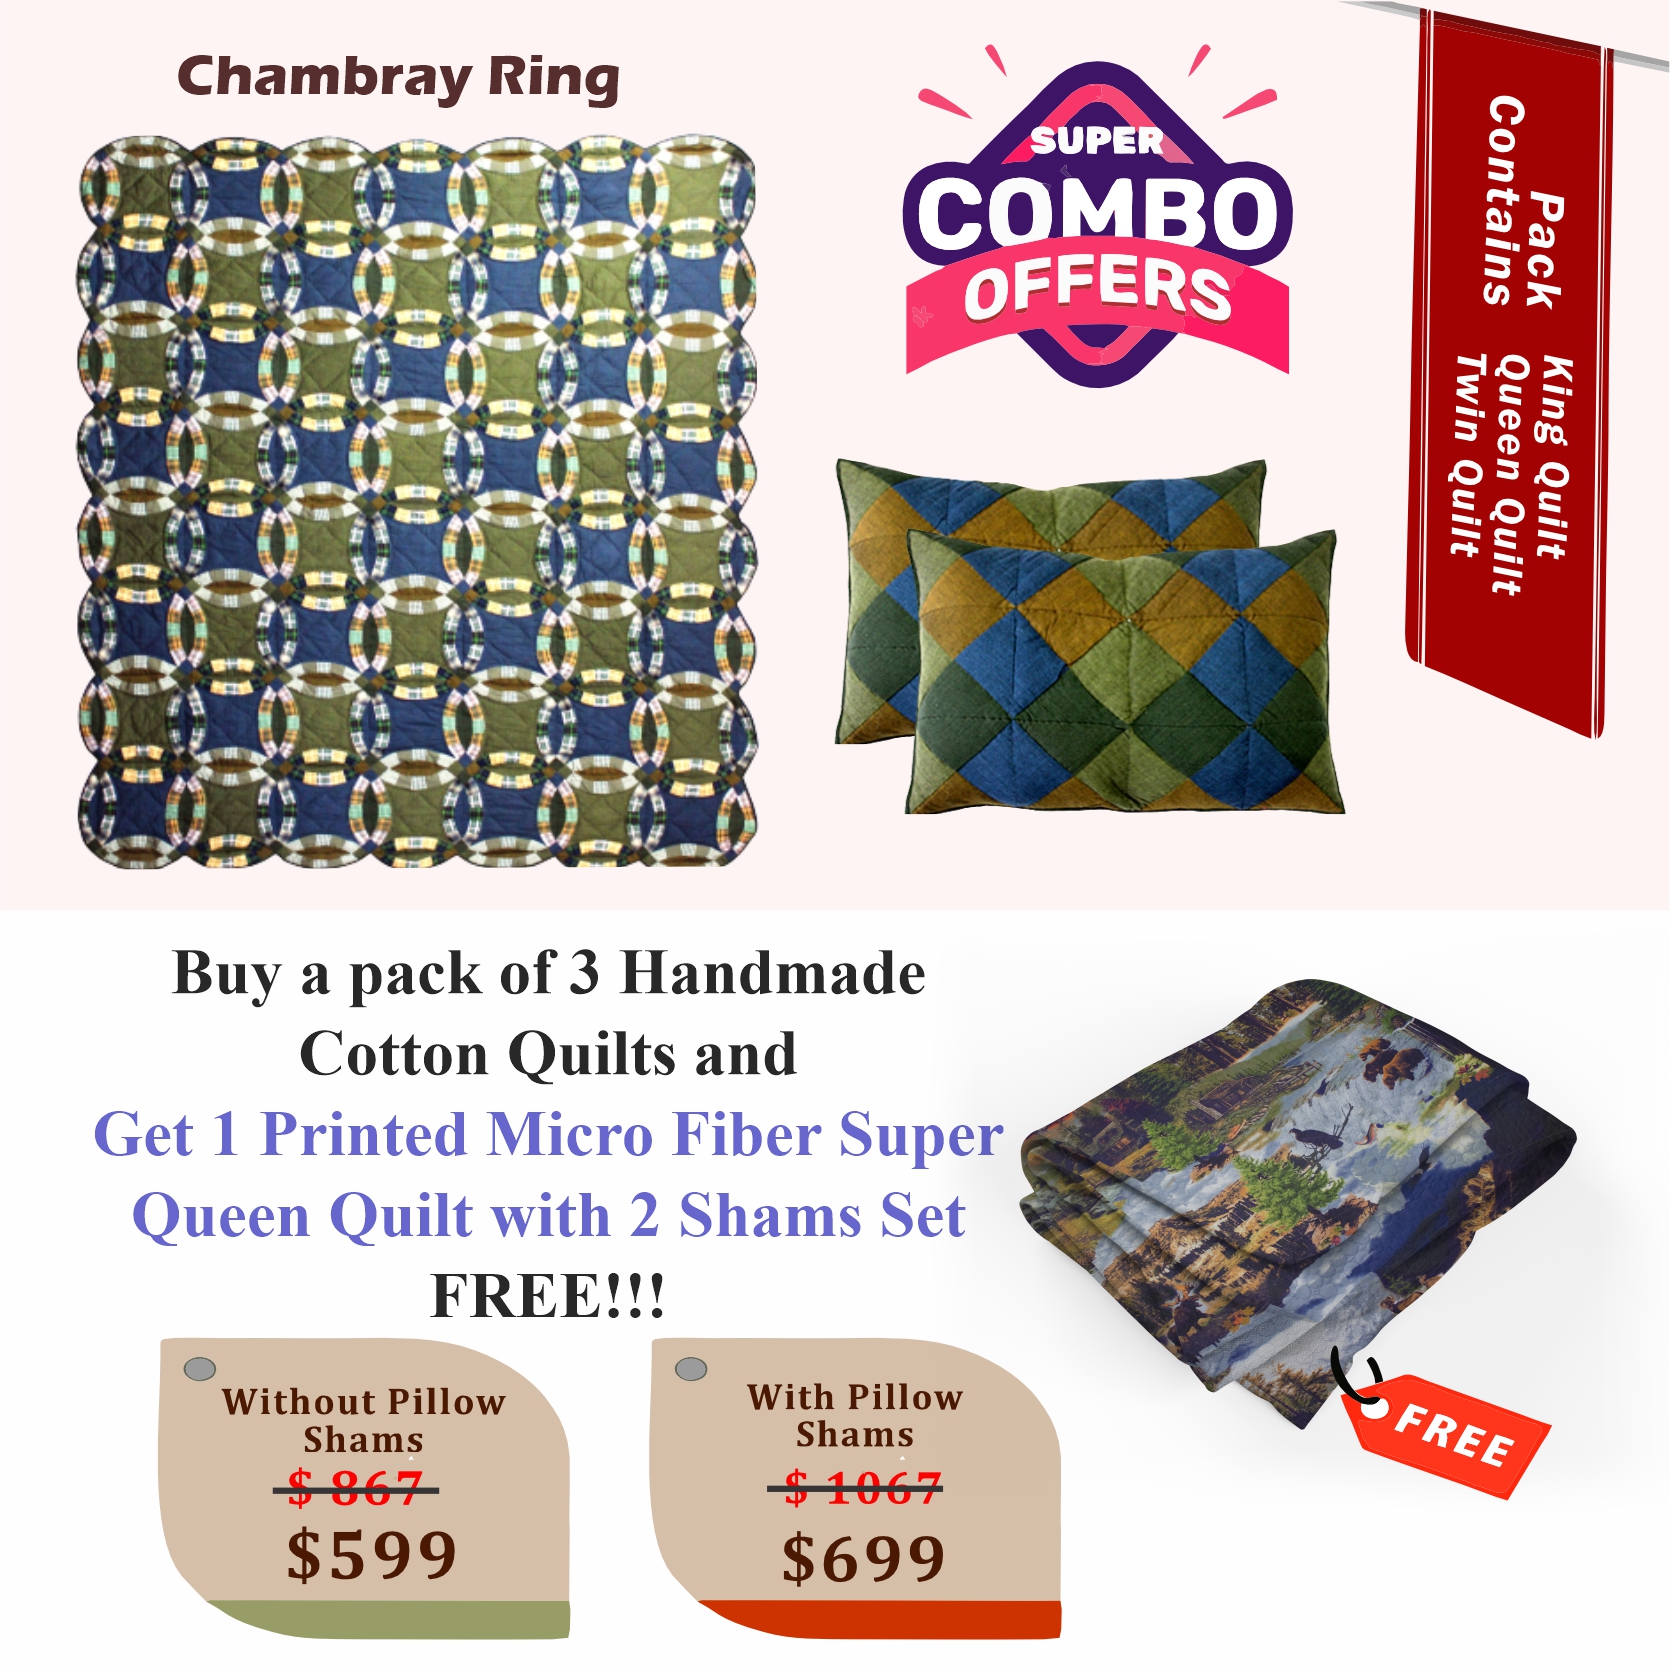 Chambray Whirl - Handmade Cotton quilts | Matching pillow shams | Buy 3 cotton quilts and get 1 Printed Microfiber Super Queen Quilt with 2 Shams set FREE